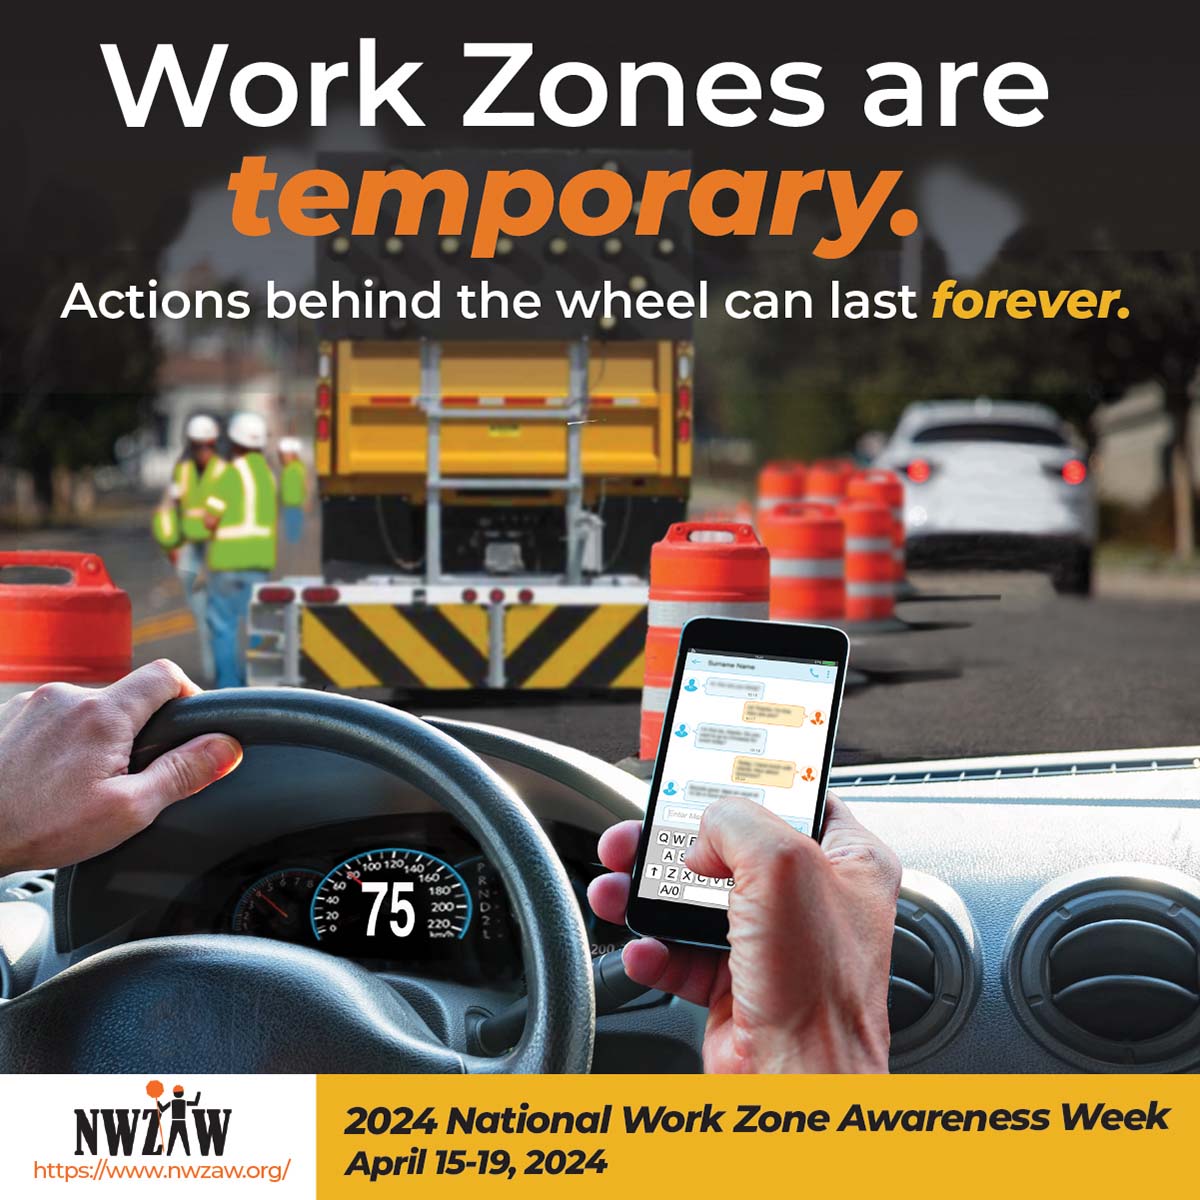 Did you know that April 15-19 is #NationalWorkZoneAwarenessWeek? It’s important to promote #WorkZoneSafety to help #KeepEachOtherSafe on the roads.